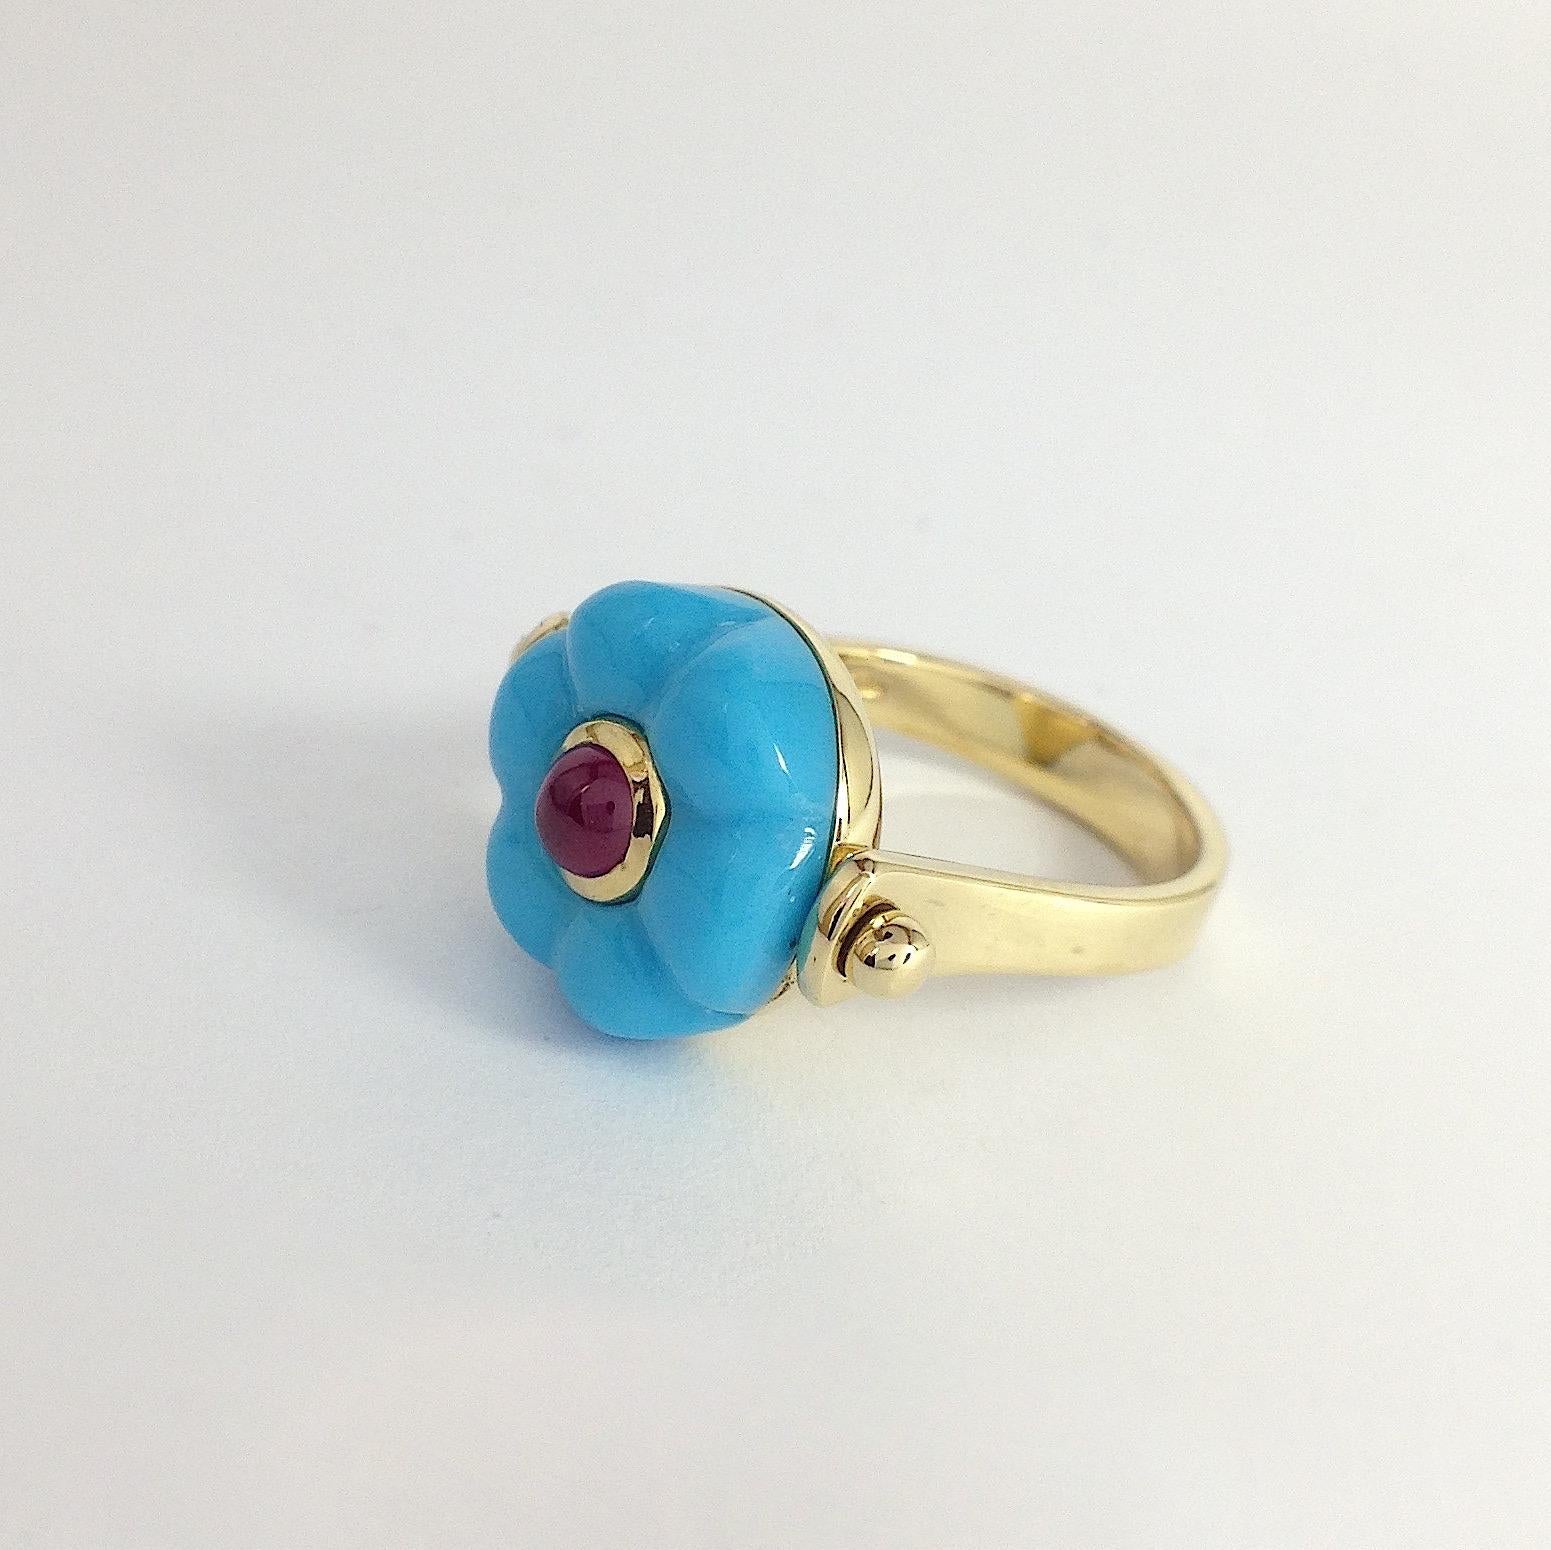 Made in Italy Gemstone Ruby Turquoise 18 Karat Gold Roman Style Turnable Ring
This ring is inspired by ancient Roman jewelry. They used to wear a ring where its head would be round. There's a light blue round natural turquoise as a button above and